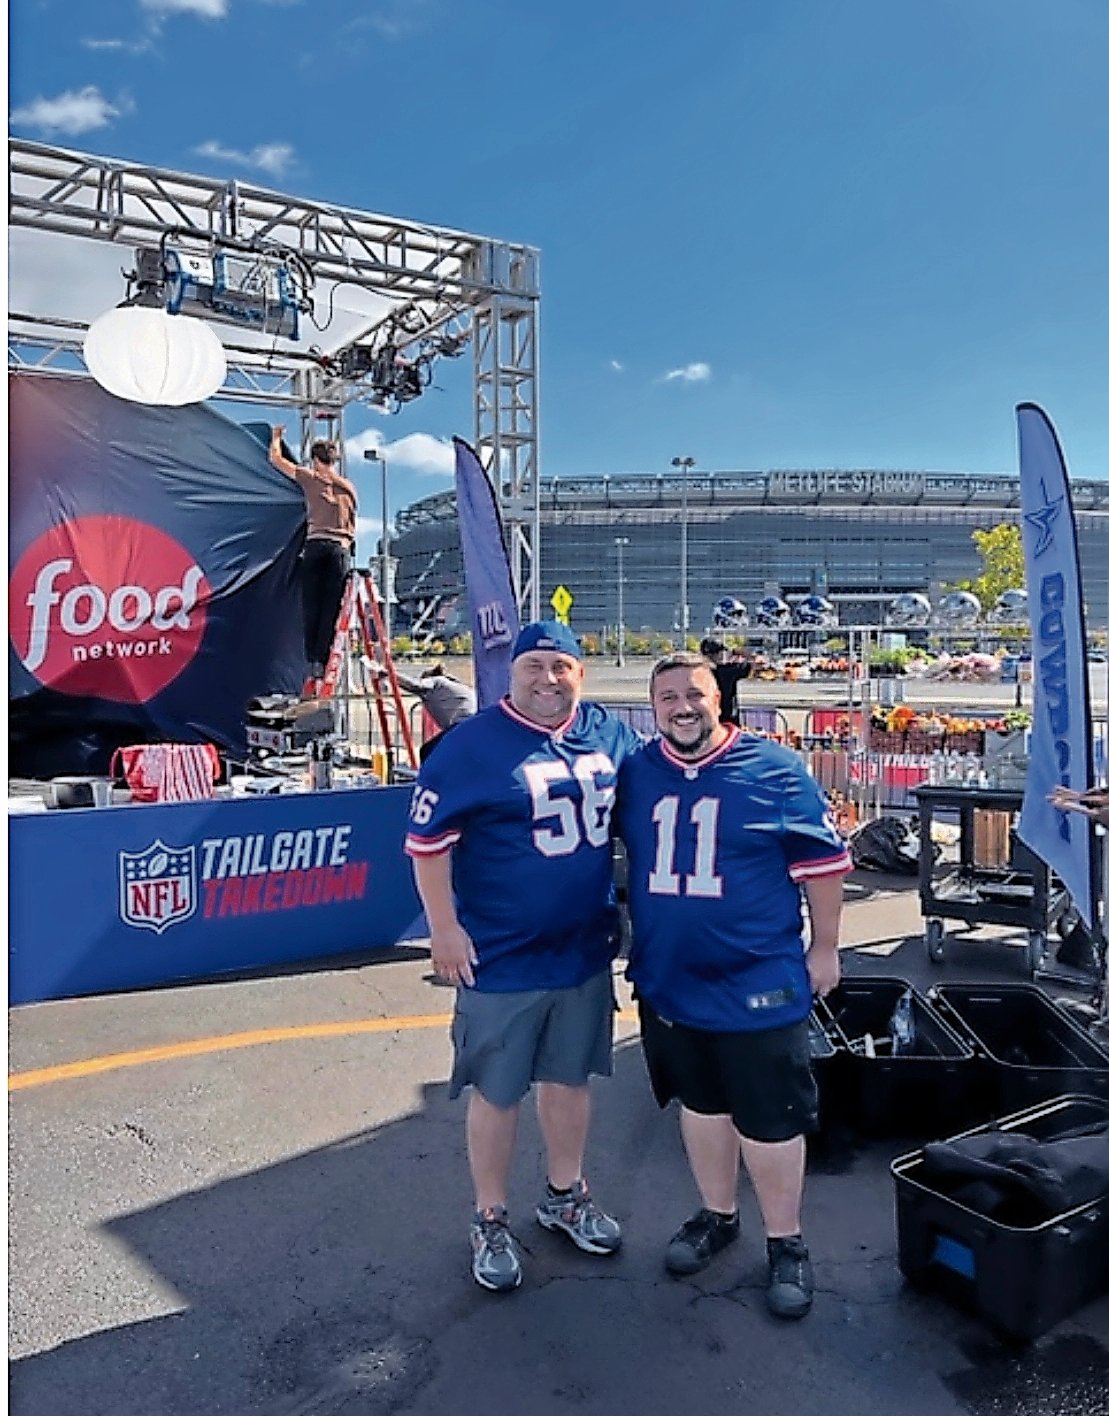 John Zozzaro and Angelo Competiello competed together on the set of Food Network’s ‘Tailgate Takedown.’ Zozzaro was approached by his teammate Angelo Competiello to compete on the show since the two have been friends for six years.